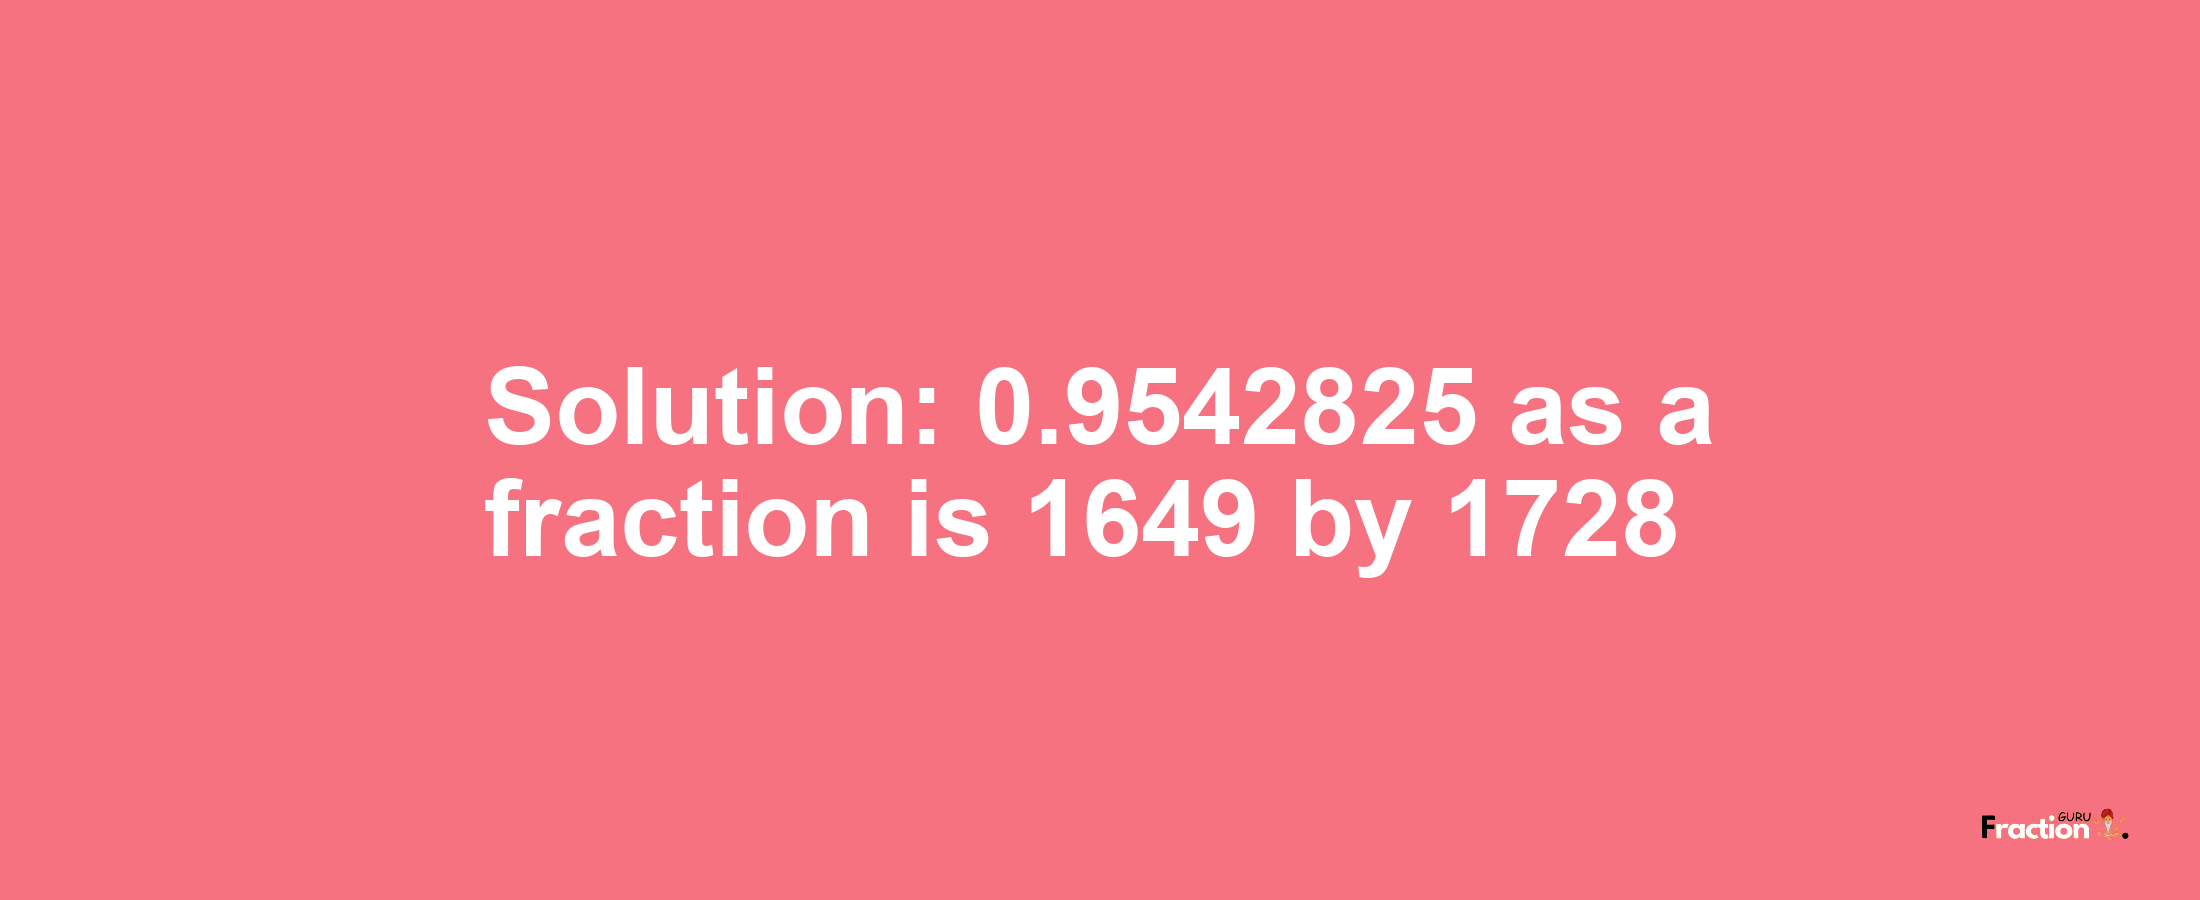 Solution:0.9542825 as a fraction is 1649/1728